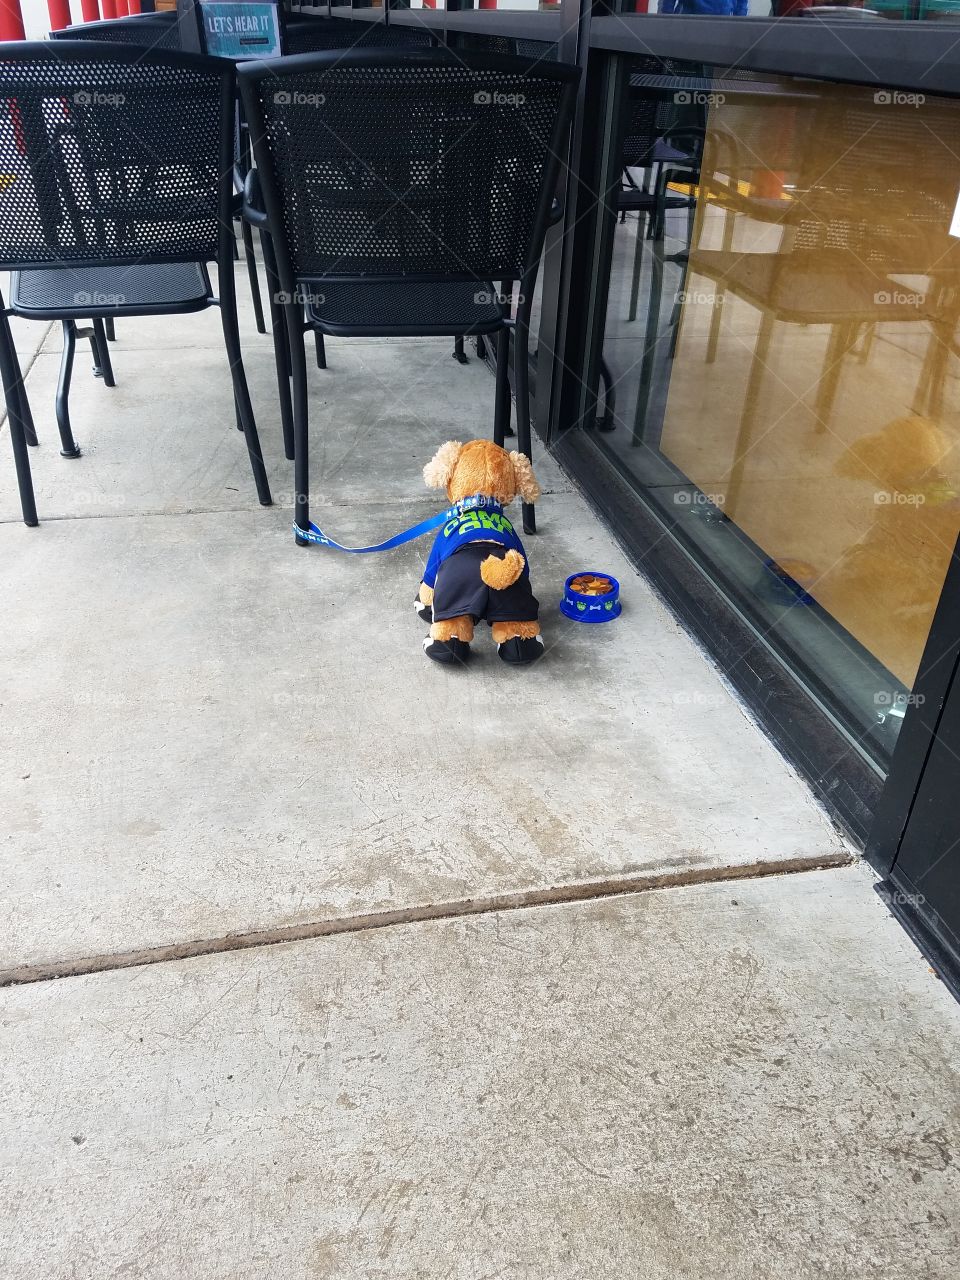 Little stuffed pup is leashed to chair leg with food dish near by, while his owner steps inside a local business.